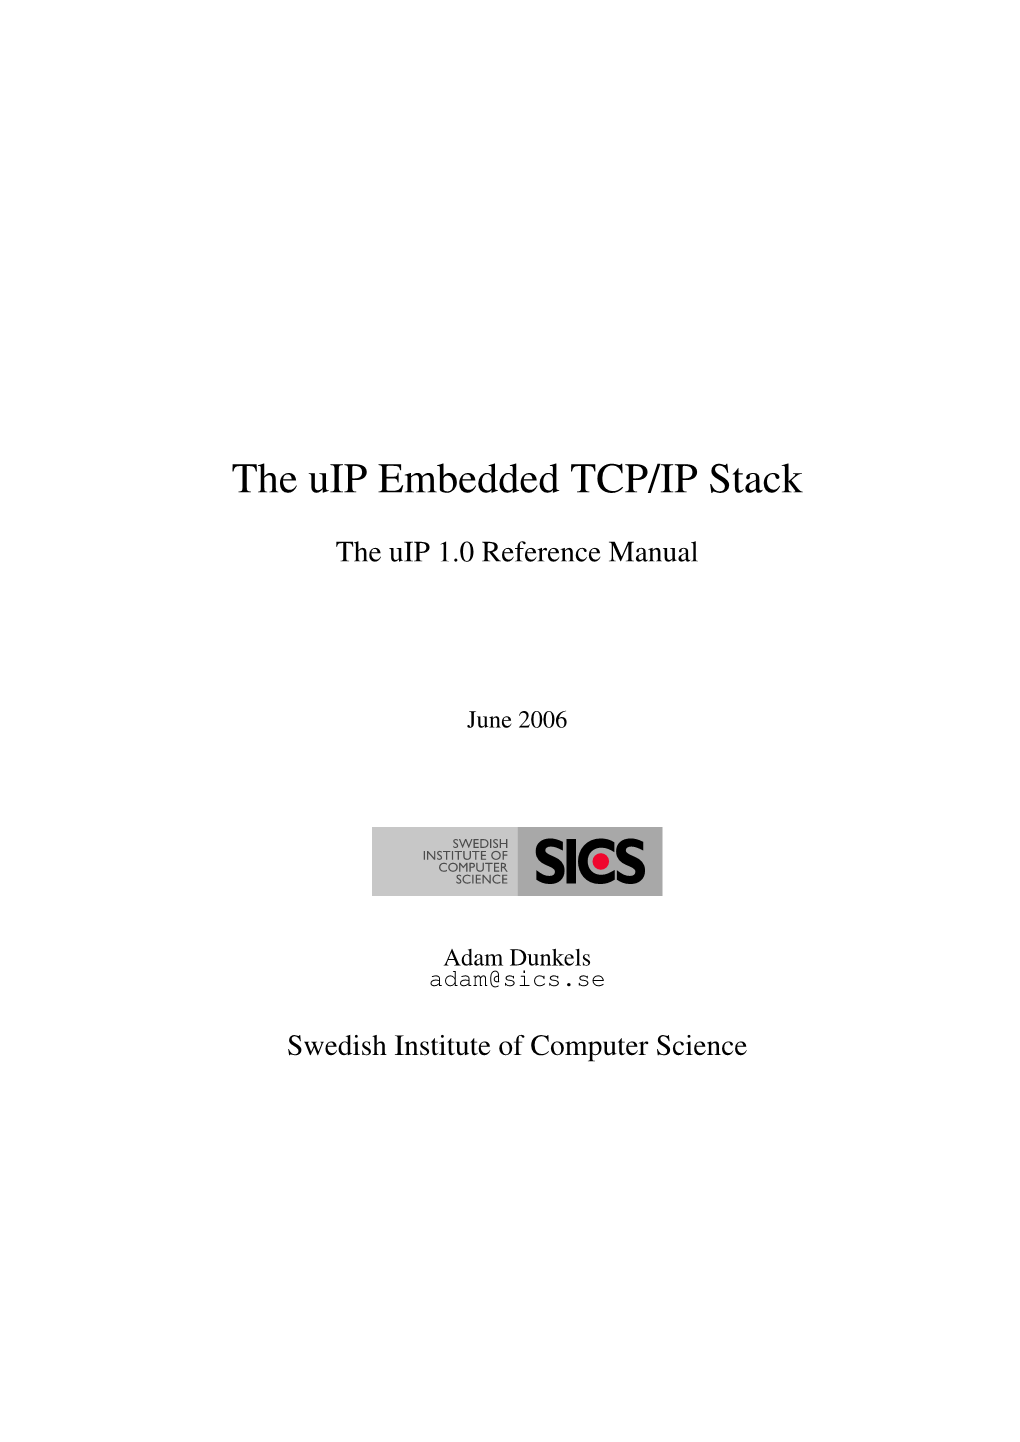 The Uip Embedded TCP/IP Stack